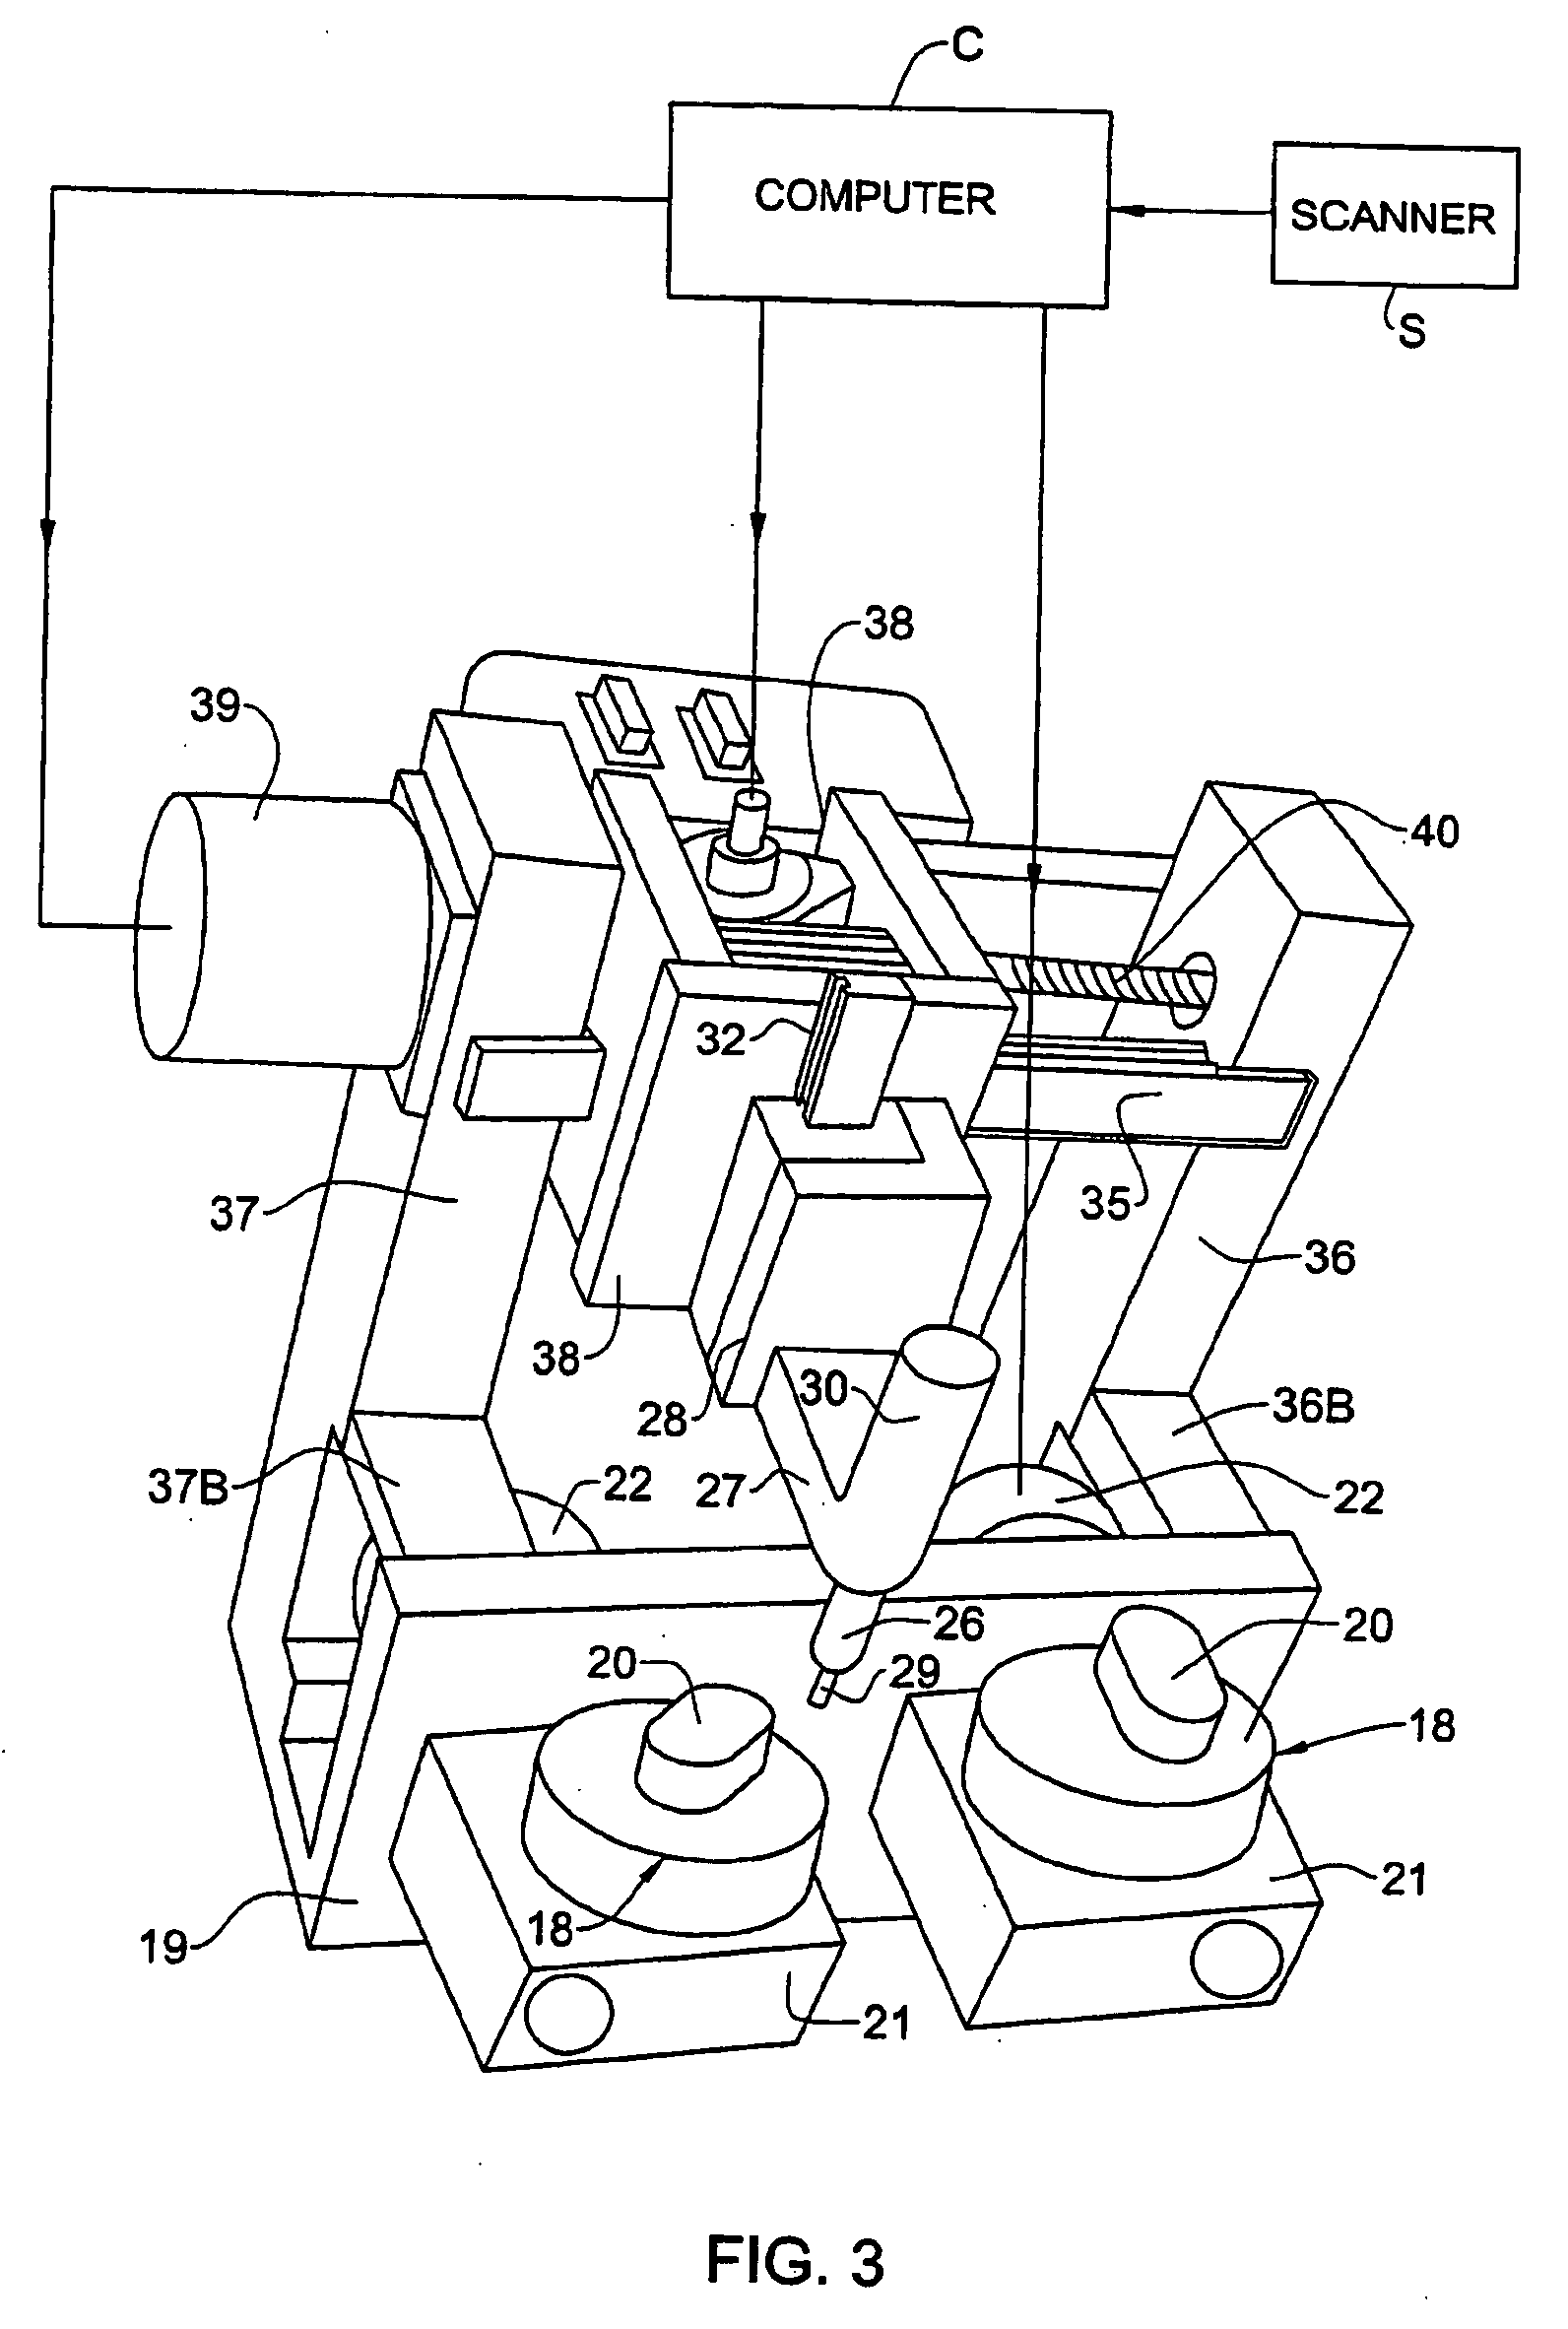 Computer-controlled milling machine for producing lenses for clip-on accessory